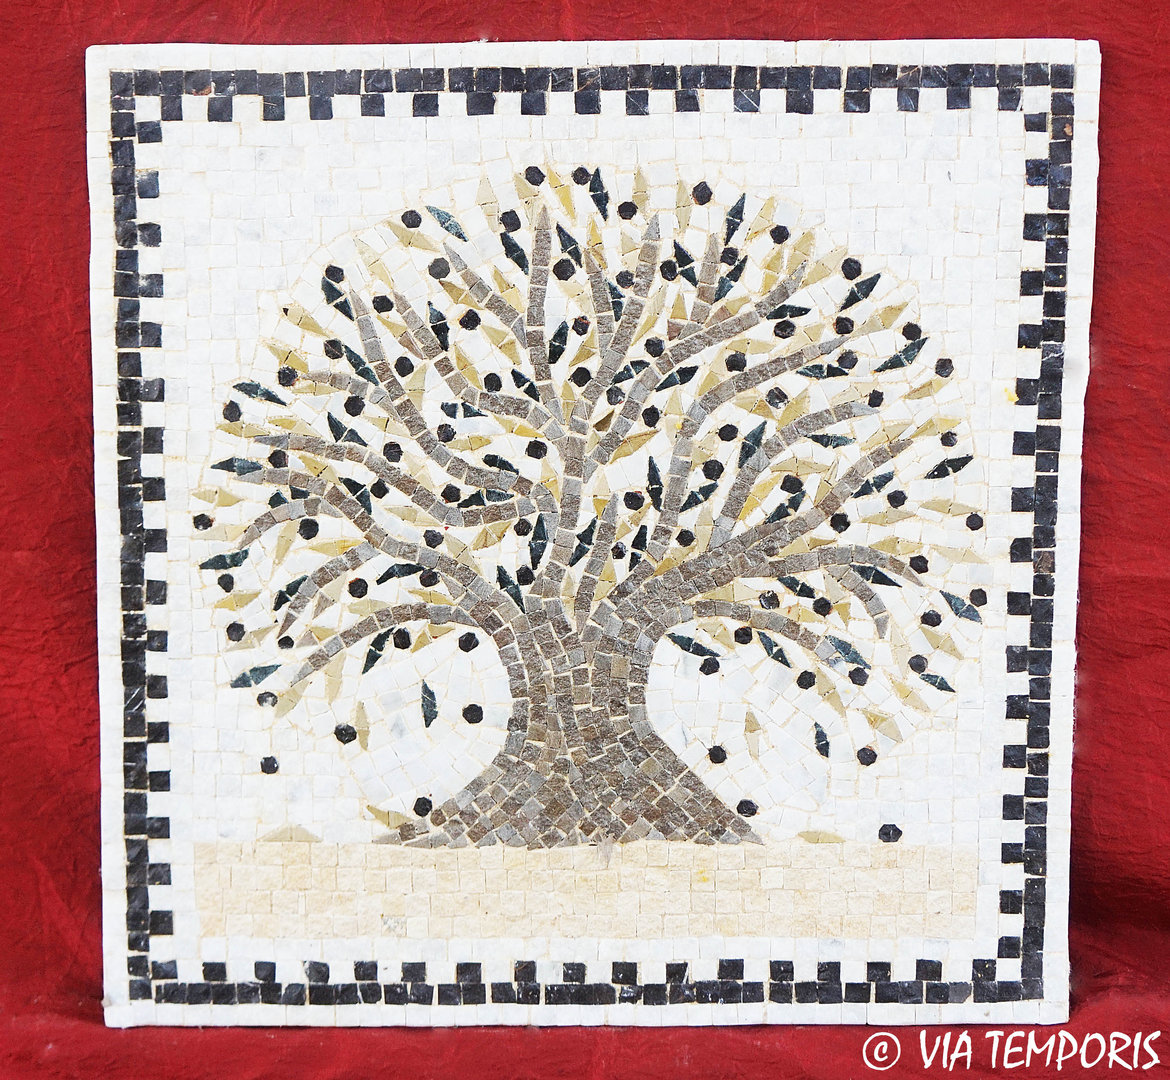 ROMAN MOSAIC - MEDALLION WITH A OLIVE TREE - SQUARE SHAPE